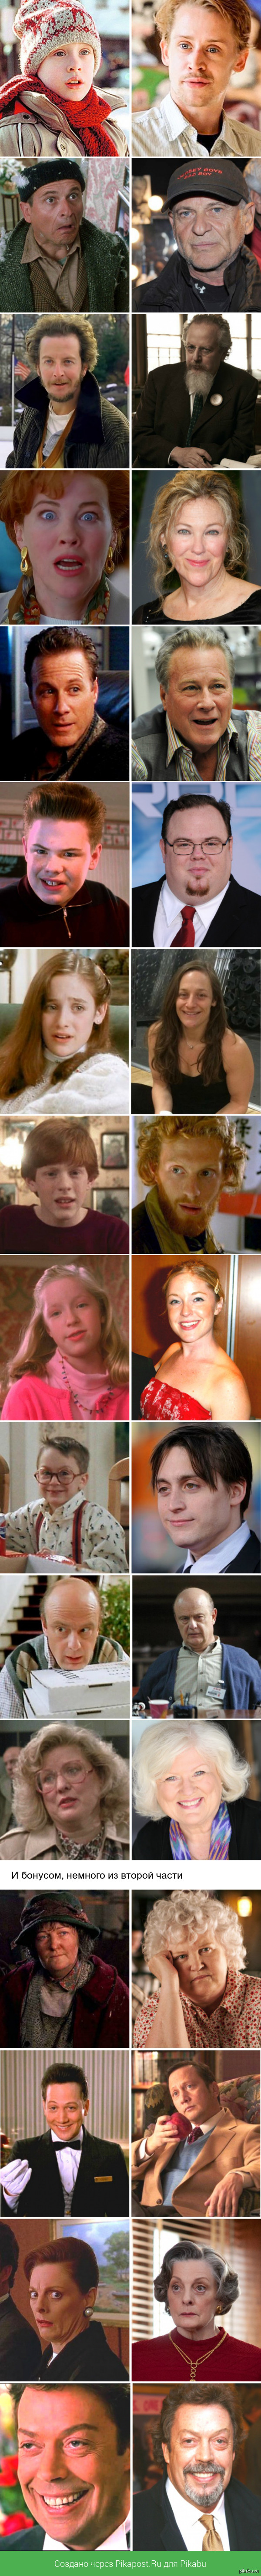 The characters in the film are home alone, then and now. - Home Alone (Movie), Longpost, Photo, Actors and actresses, Alone at home, Movies